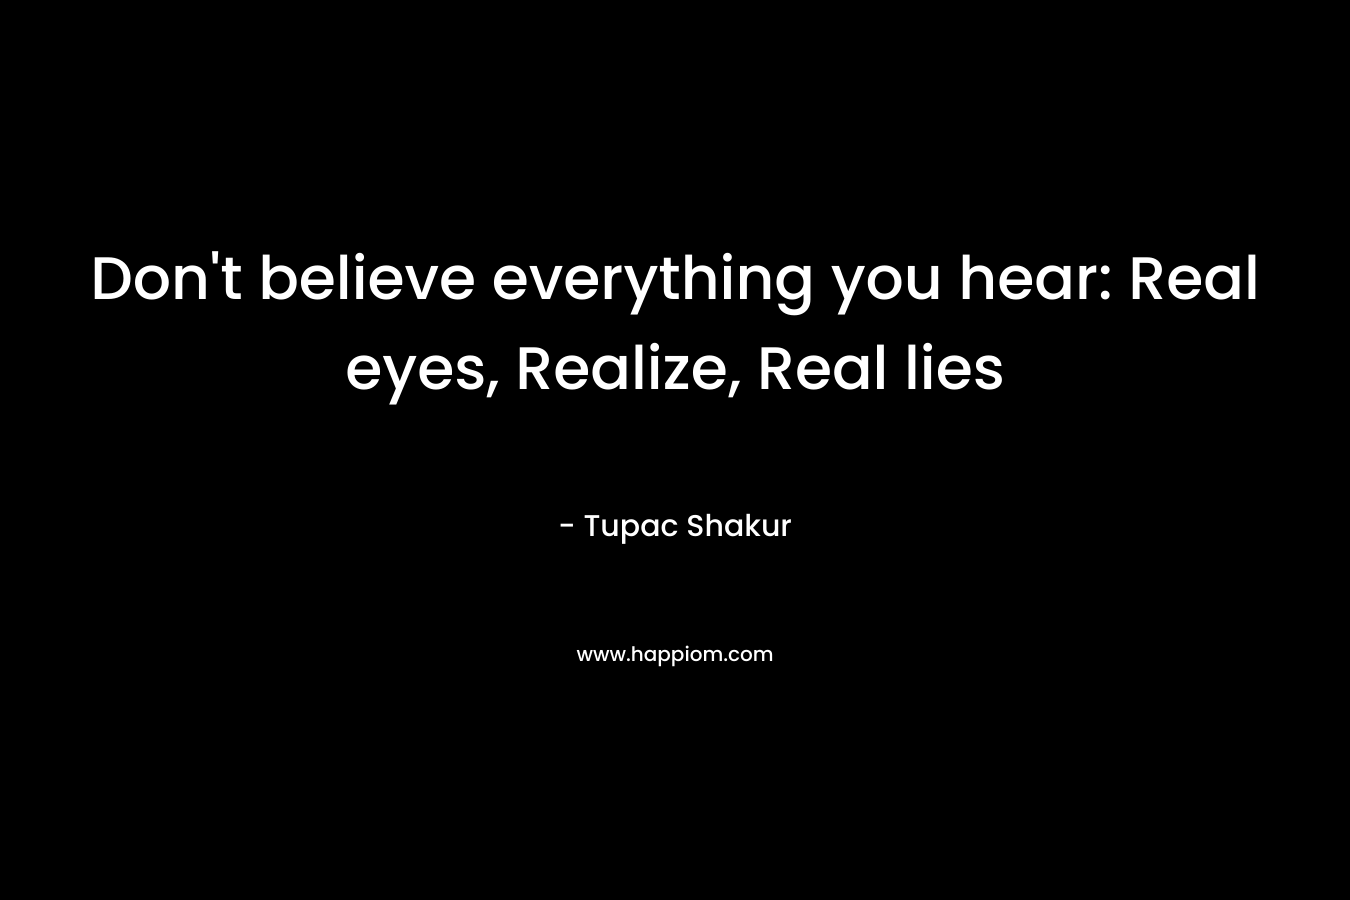 Don't believe everything you hear: Real eyes, Realize, Real lies